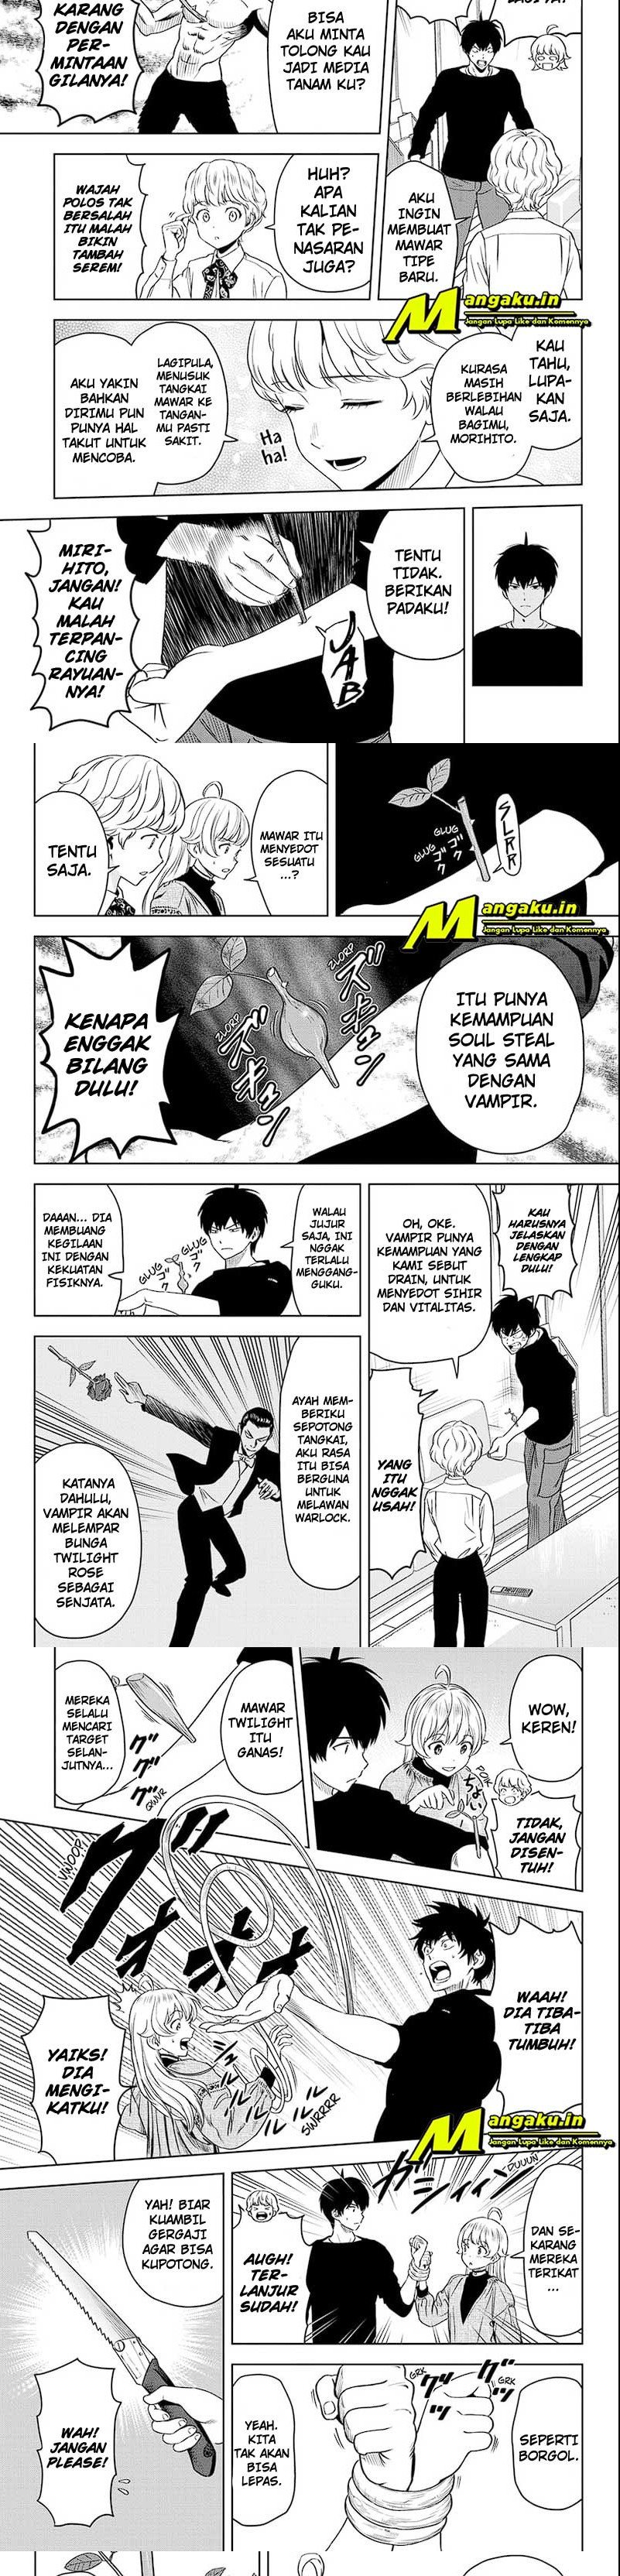 Witch Watch Chapter 92 Bahasa Indonesia